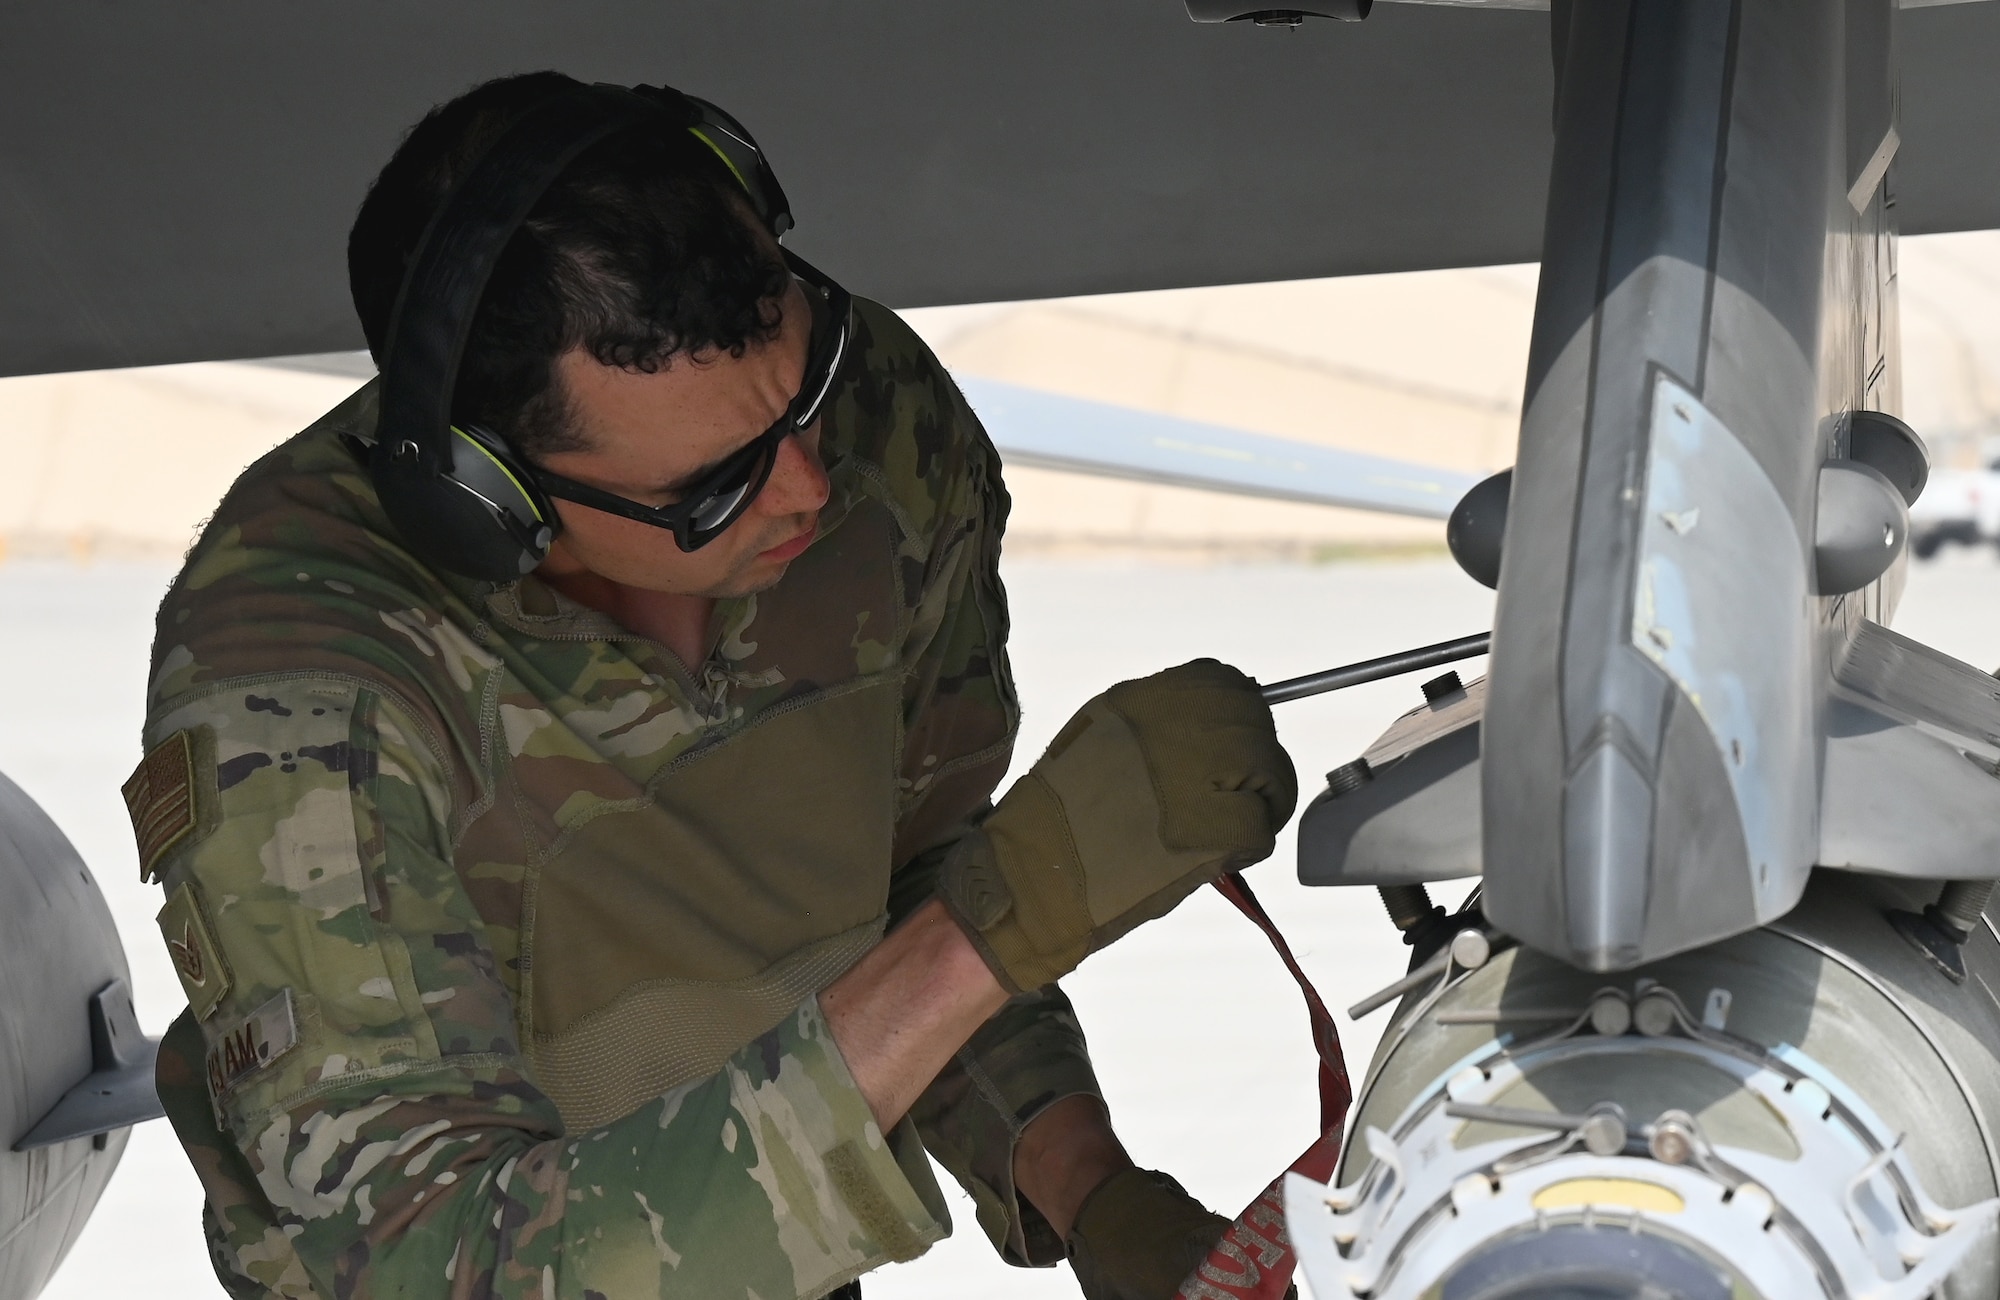 A photo of a man replacing a pin on a jet.